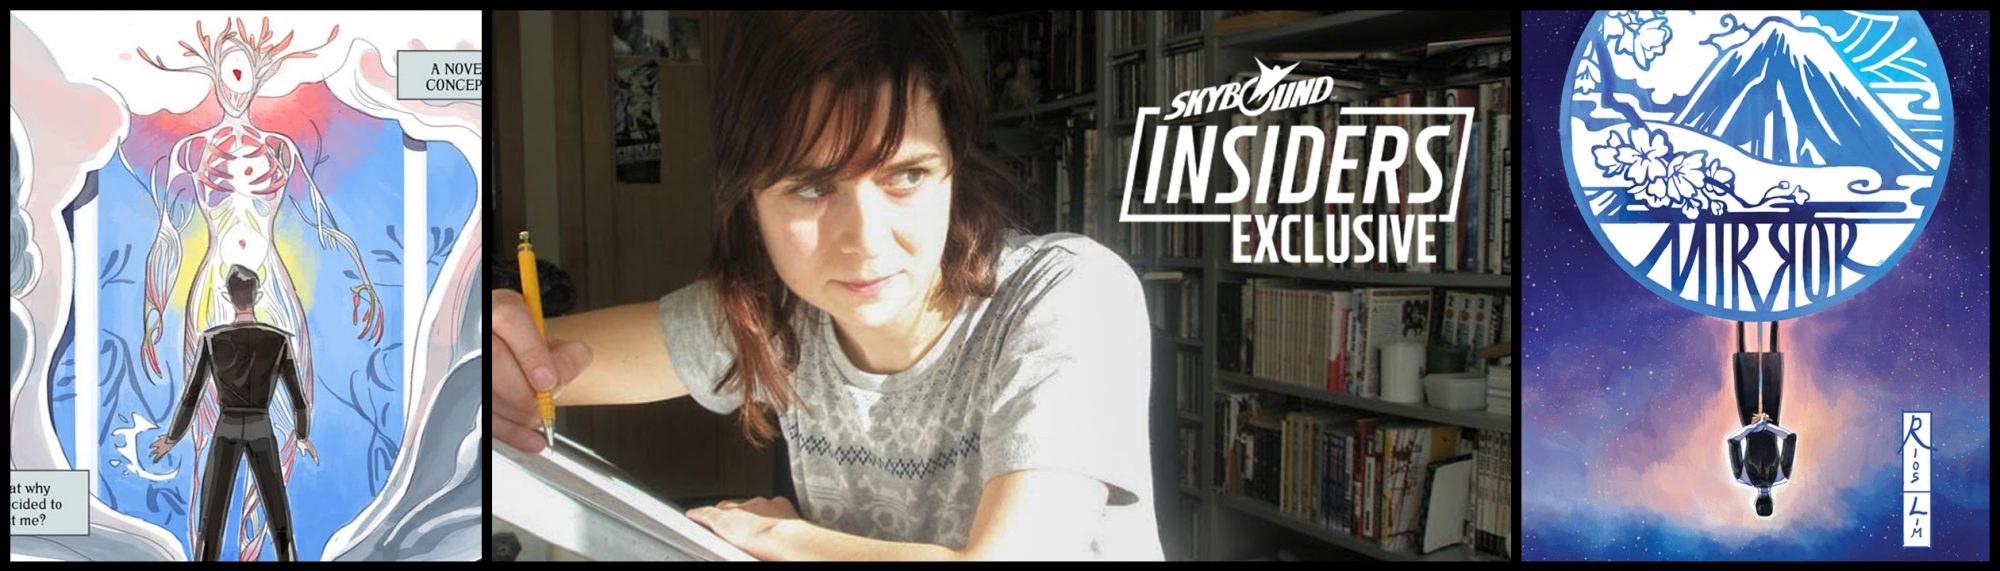 From Architect to Artist: Emma Ríos’ Rise in Comics